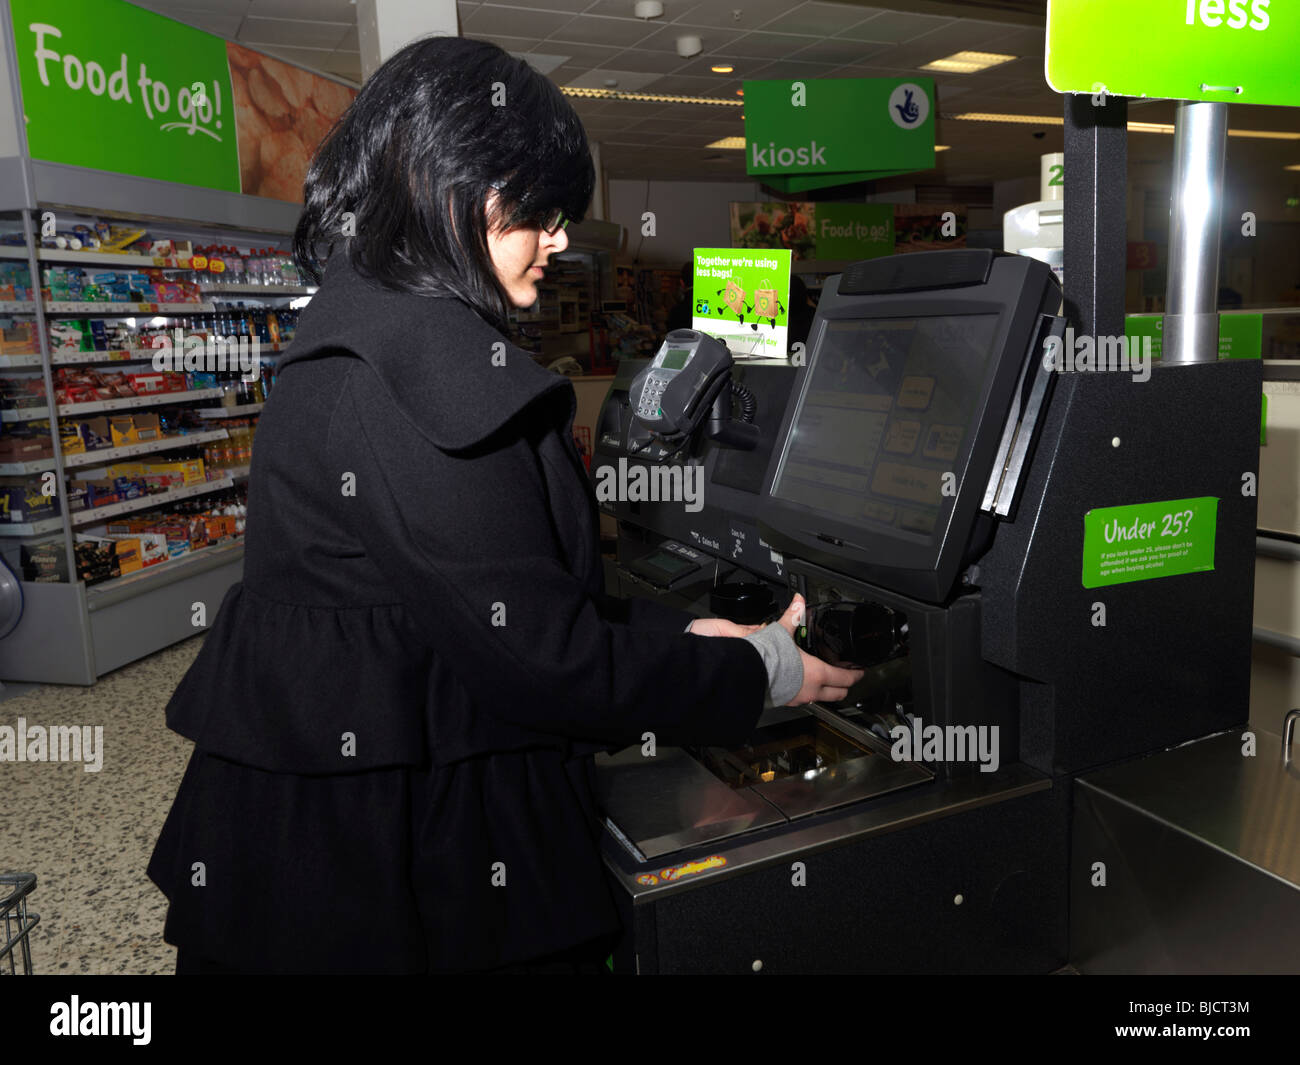 Scanning a Jar of Coffee at the Self Checkout at a Supermarket Stock Photo